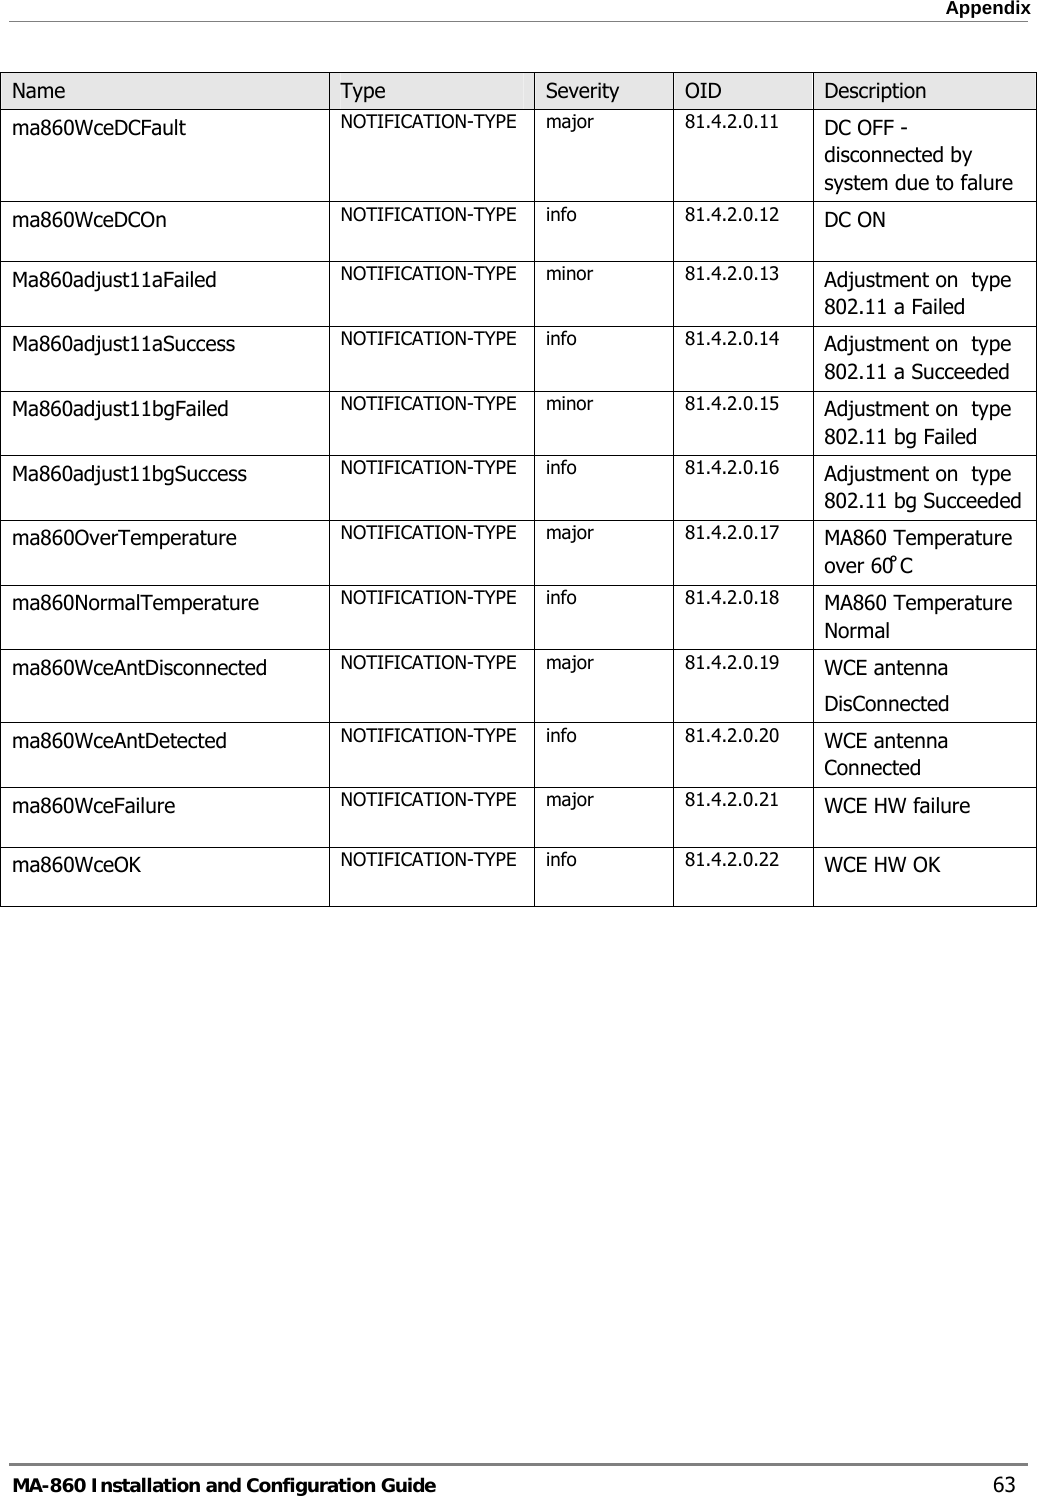  Appendix Name     Type  Severity  OID  Description ma860WceDCFault  NOTIFICATION-TYPE  major 81.4.2.0.11  DC OFF - disconnected by system due to falure ma860WceDCOn  NOTIFICATION-TYPE  info 81.4.2.0.12  DC ON Ma860adjust11aFailed  NOTIFICATION-TYPE  minor 81.4.2.0.13  Adjustment on  type 802.11 a Failed Ma860adjust11aSuccess  NOTIFICATION-TYPE  info 81.4.2.0.14  Adjustment on  type 802.11 a Succeeded Ma860adjust11bgFailed  NOTIFICATION-TYPE  minor 81.4.2.0.15  Adjustment on  type 802.11 bg Failed Ma860adjust11bgSuccess  NOTIFICATION-TYPE  info 81.4.2.0.16  Adjustment on  type 802.11 bg Succeeded ma860OverTemperature  NOTIFICATION-TYPE  major 81.4.2.0.17  MA860 Temperature over 60̊ C ma860NormalTemperature  NOTIFICATION-TYPE  info 81.4.2.0.18  MA860 Temperature Normal ma860WceAntDisconnected  NOTIFICATION-TYPE  major 81.4.2.0.19  WCE antenna  DisConnected ma860WceAntDetected  NOTIFICATION-TYPE  info 81.4.2.0.20  WCE antenna Connected ma860WceFailure  NOTIFICATION-TYPE  major 81.4.2.0.21  WCE HW failure ma860WceOK  NOTIFICATION-TYPE  info 81.4.2.0.22  WCE HW OK  MA-860 Installation and Configuration Guide    63 